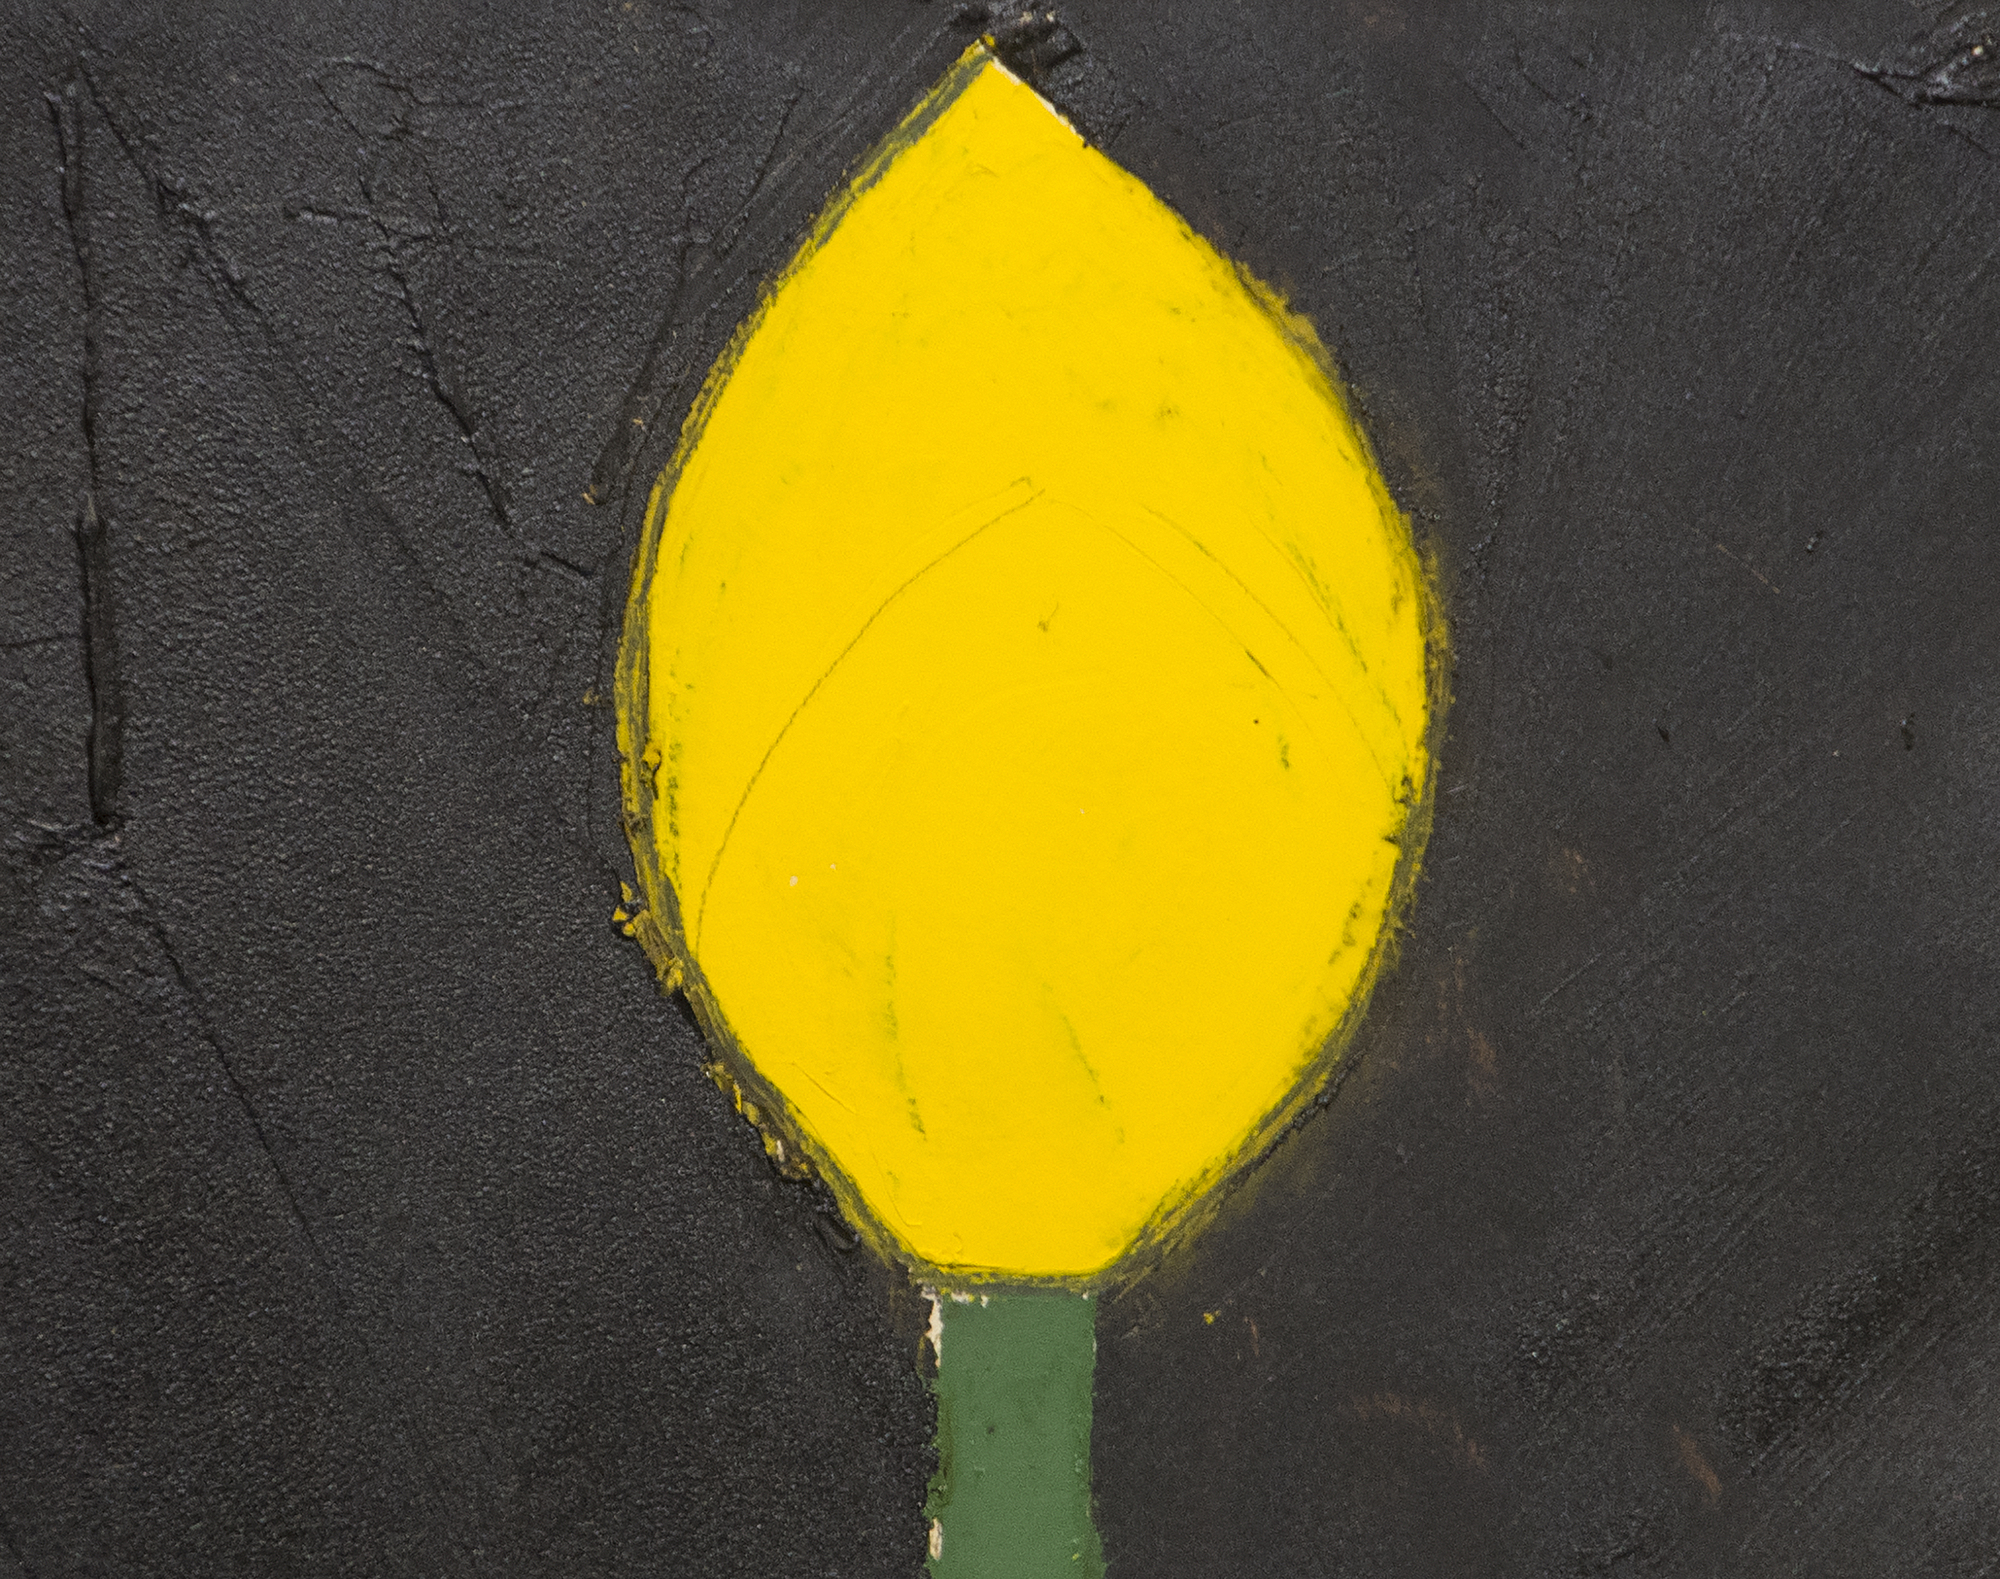 DONALD SULTAN - Yellow Tulip No 18 - 油彩、タール、紙 - 20 x 20 in.